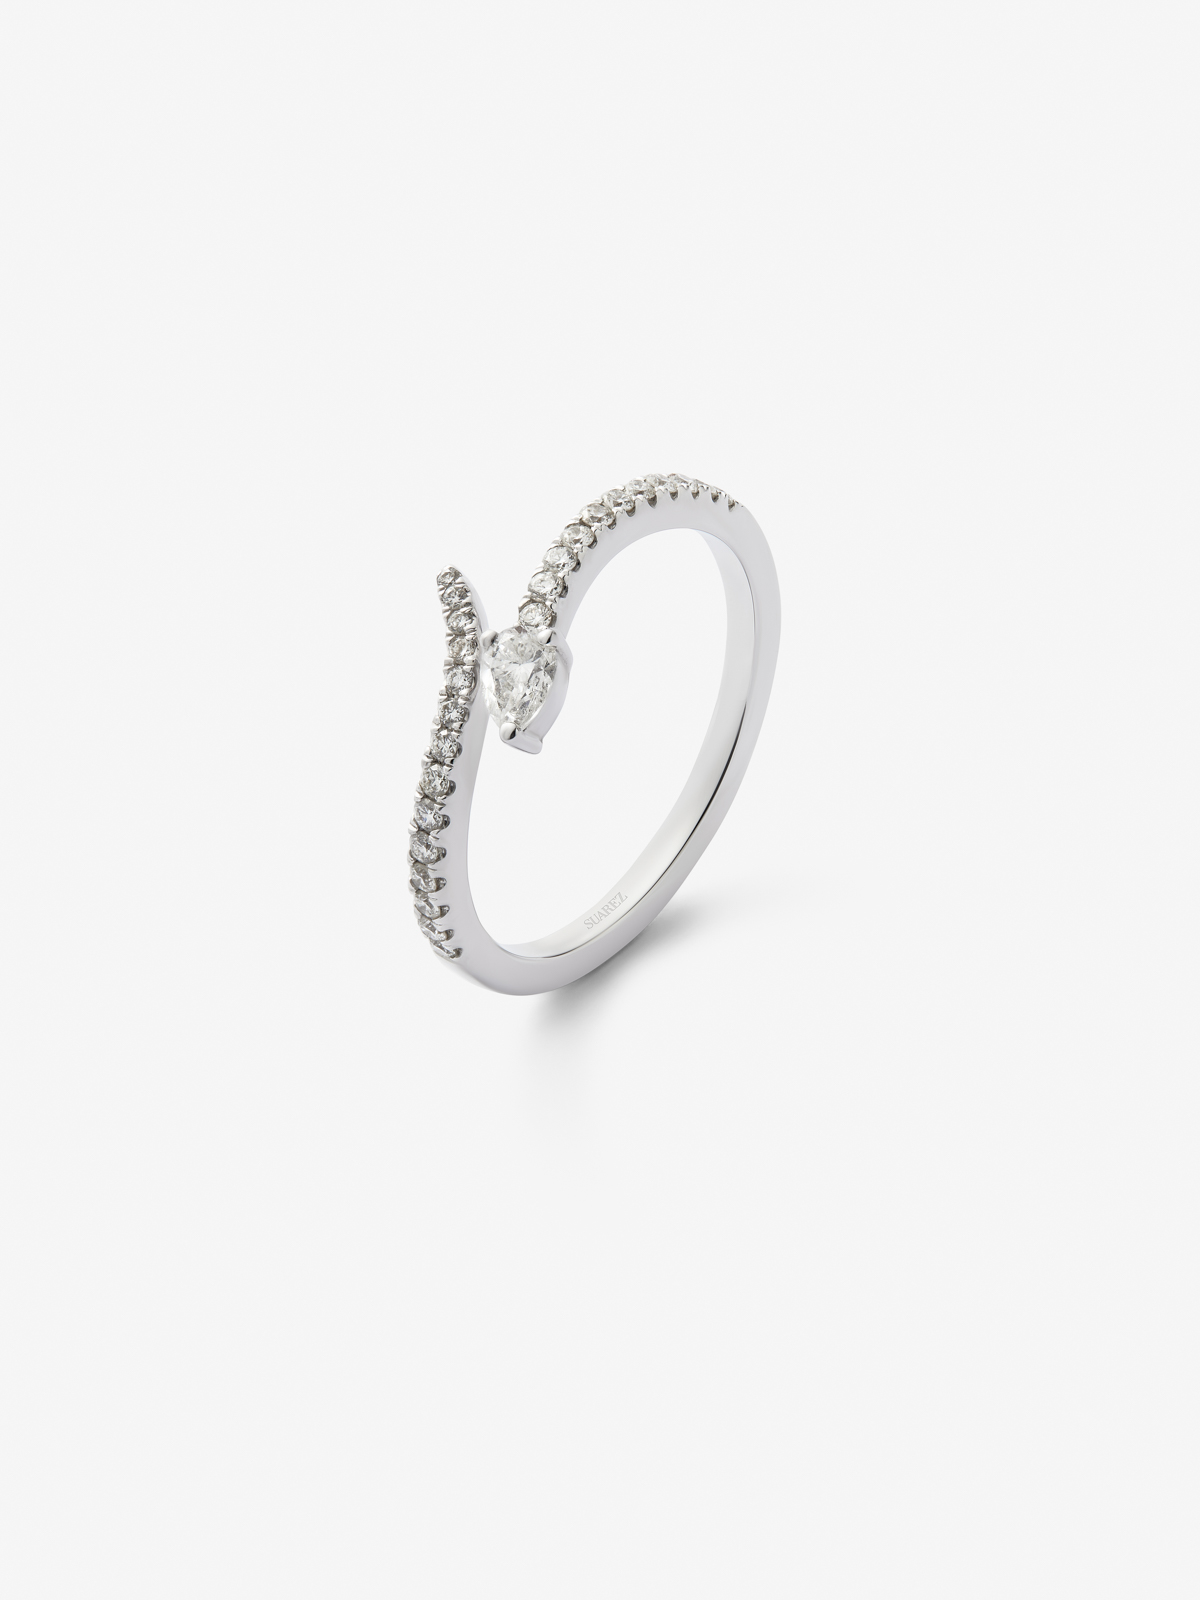 You and me ring in 18K white gold with brilliant-cut and pear-cut white diamonds of 0.32 cts